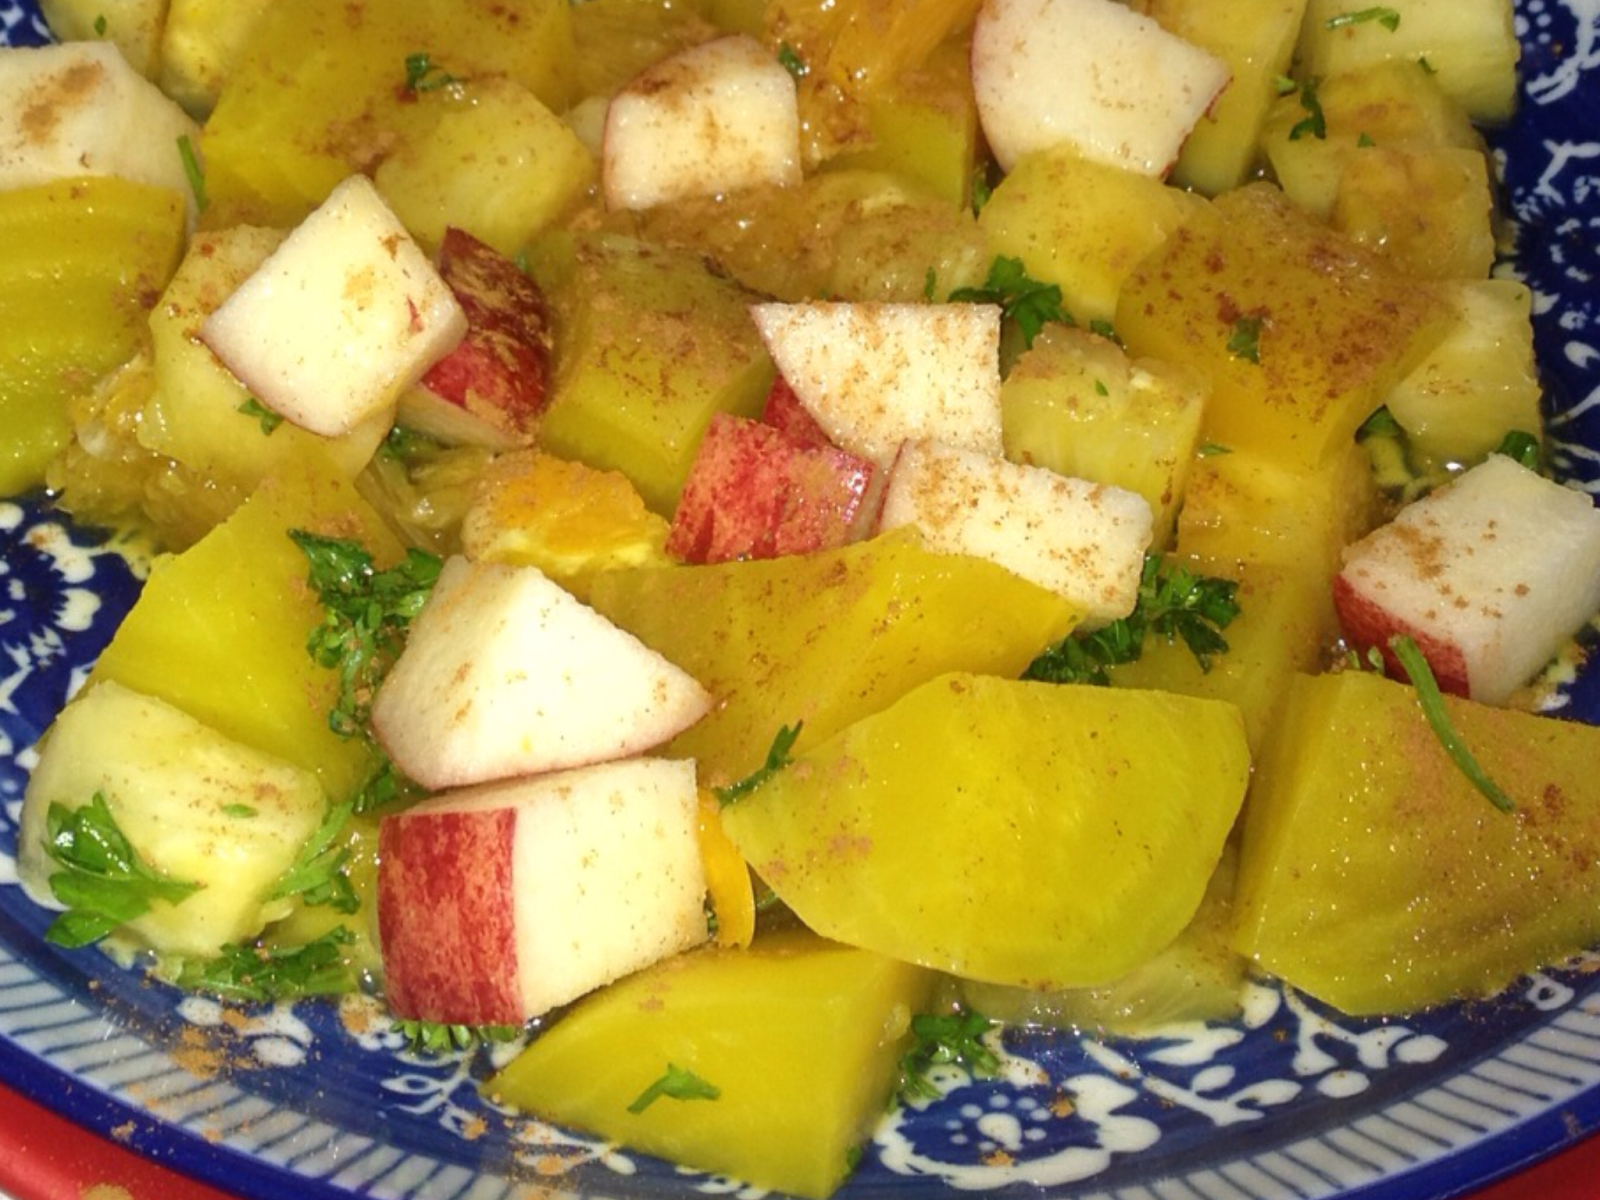 yellow beet salad with chopped apples